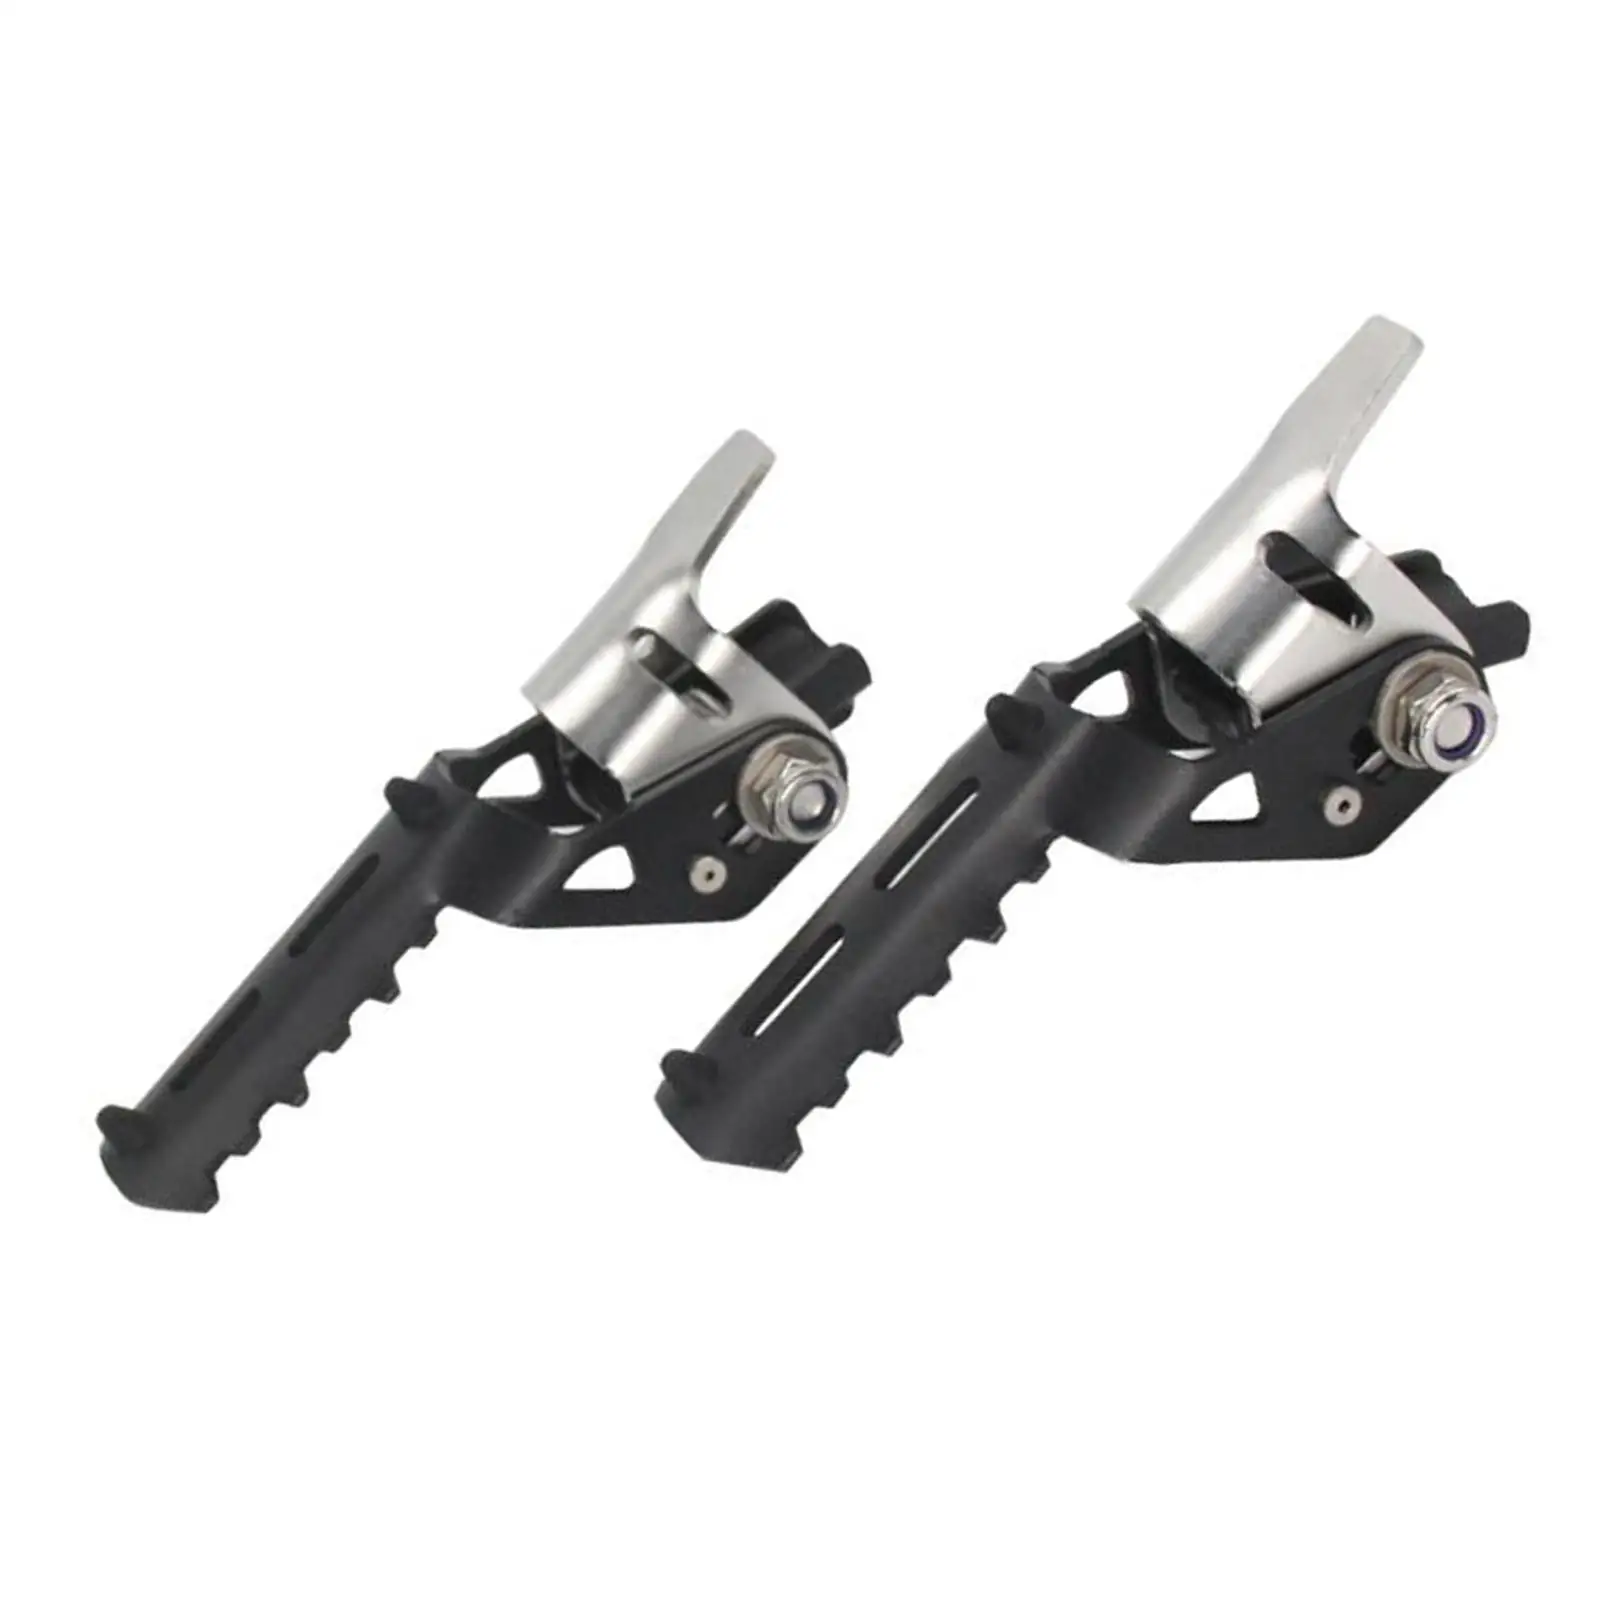 Highway Front Foot Pegs Folding Footrests Clamps for R1250GS R 1250 GS Accessories